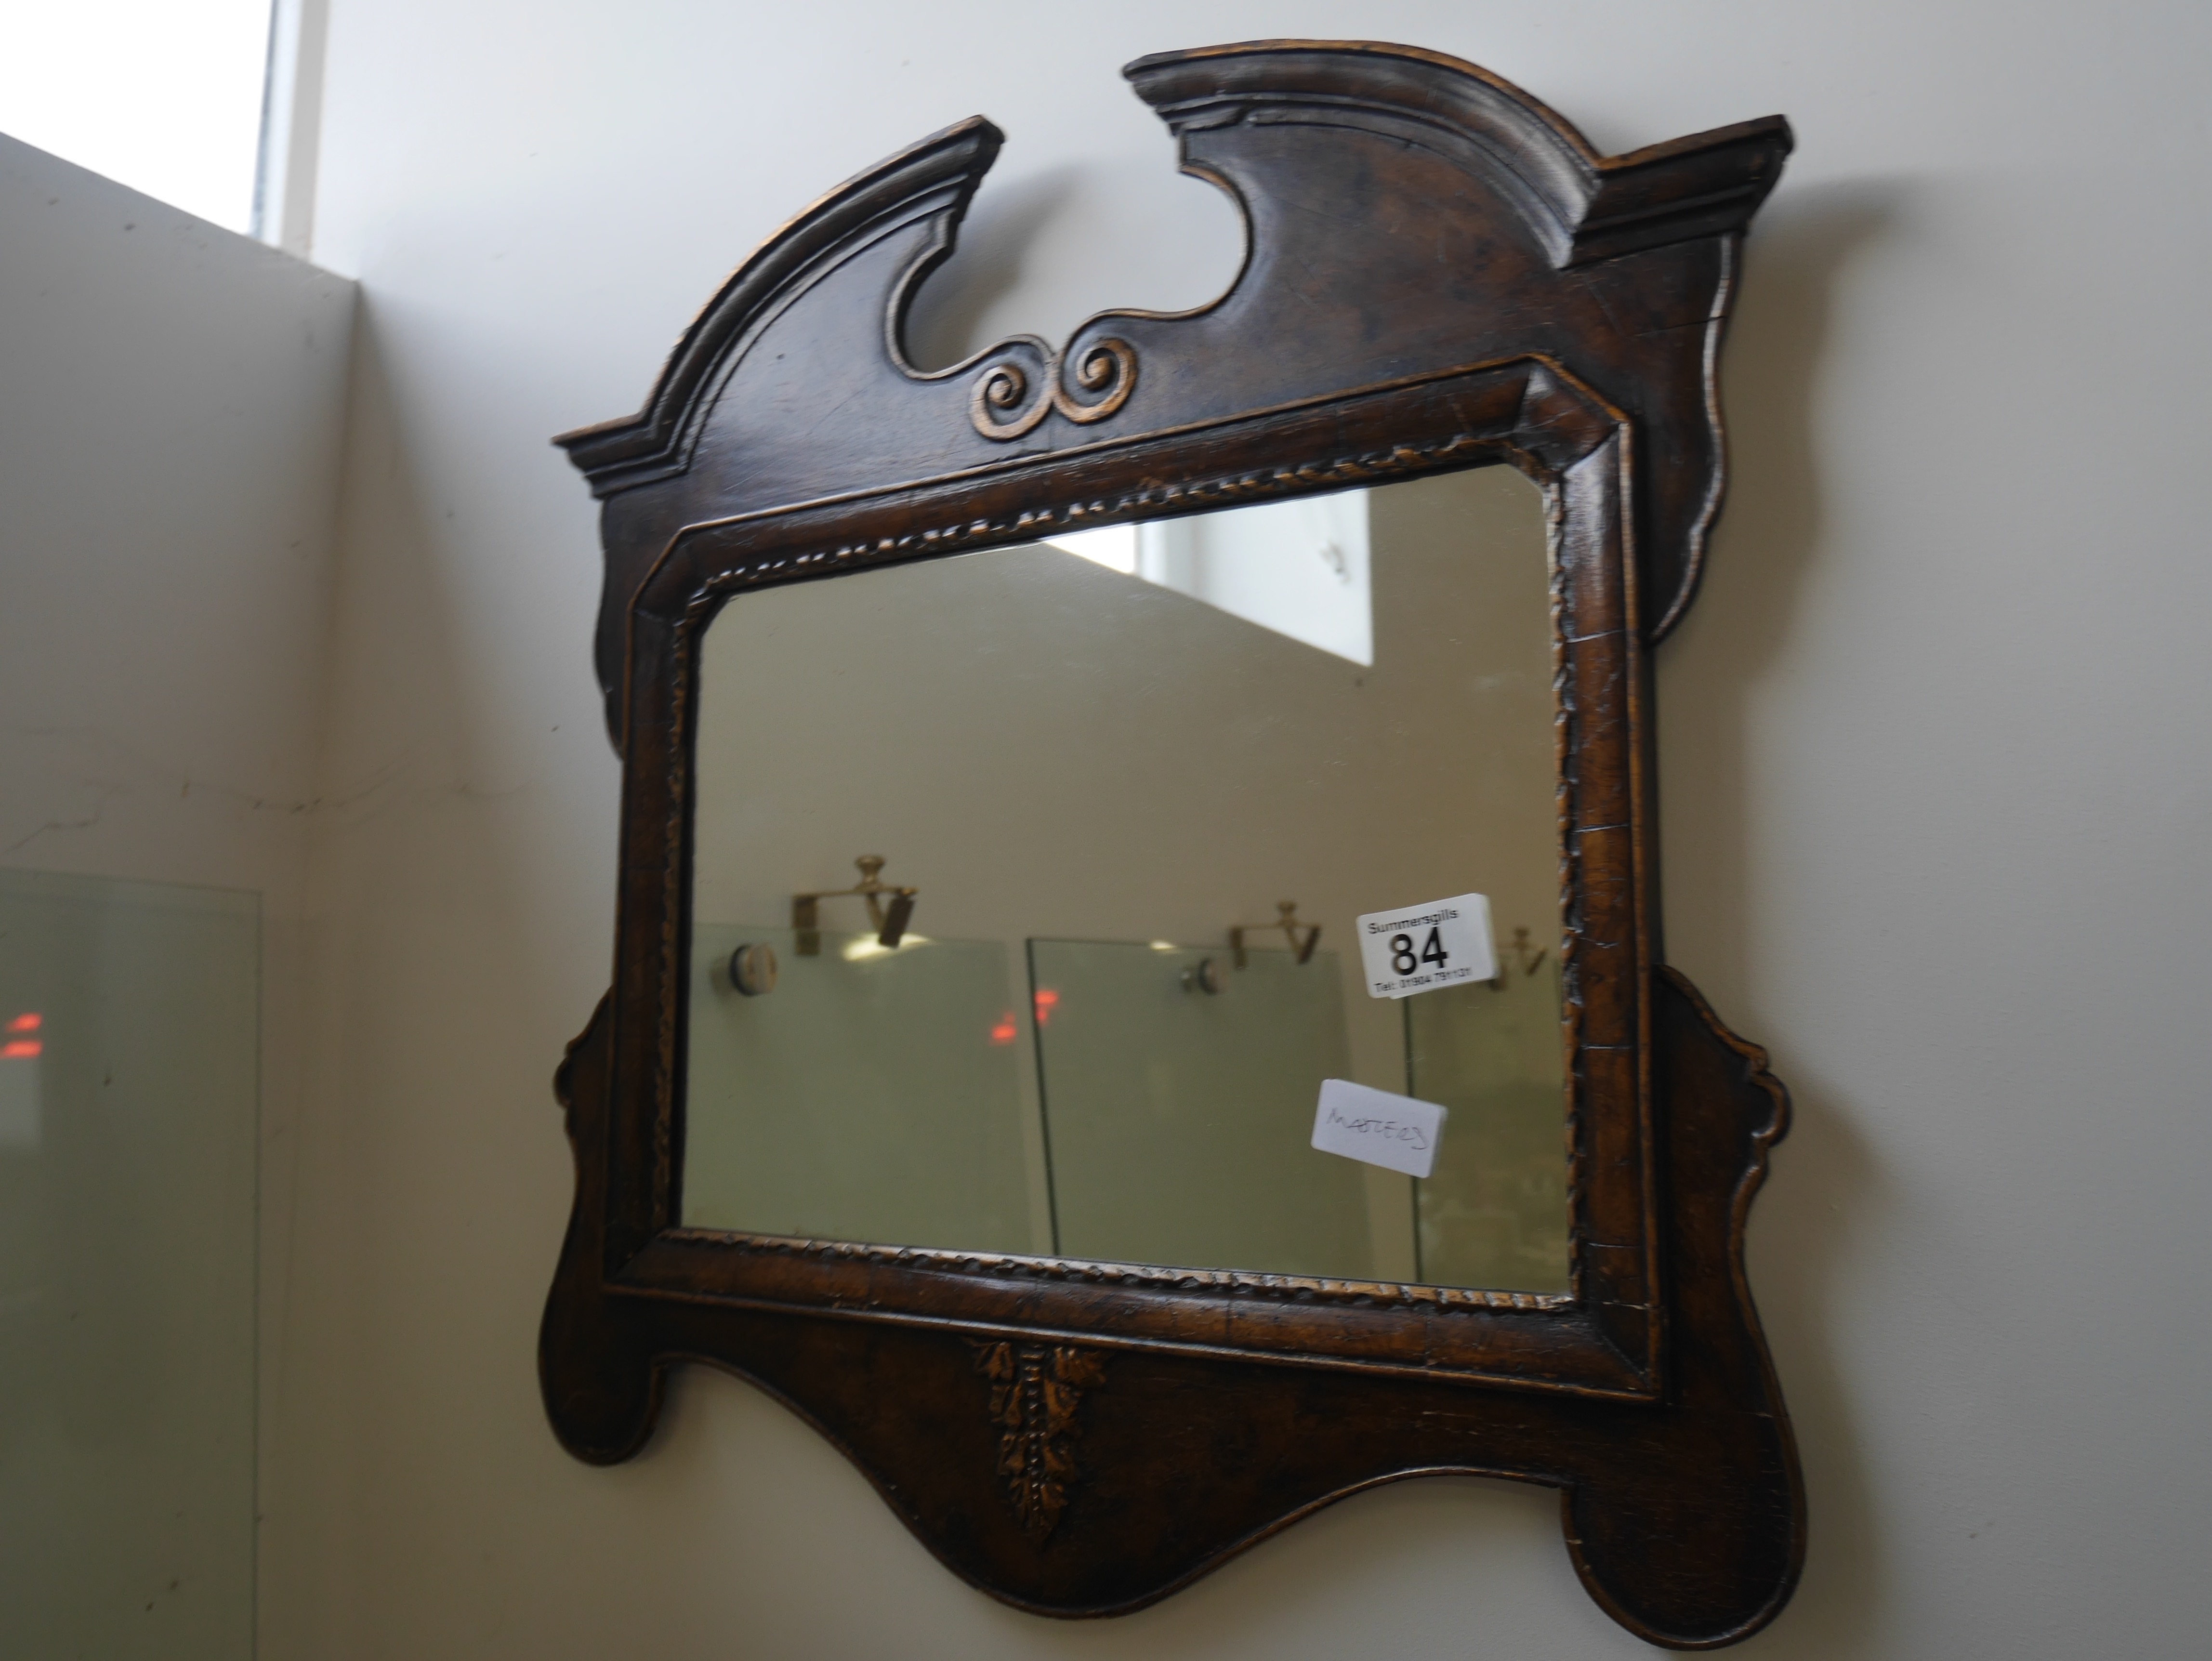 Antique style wall mirror